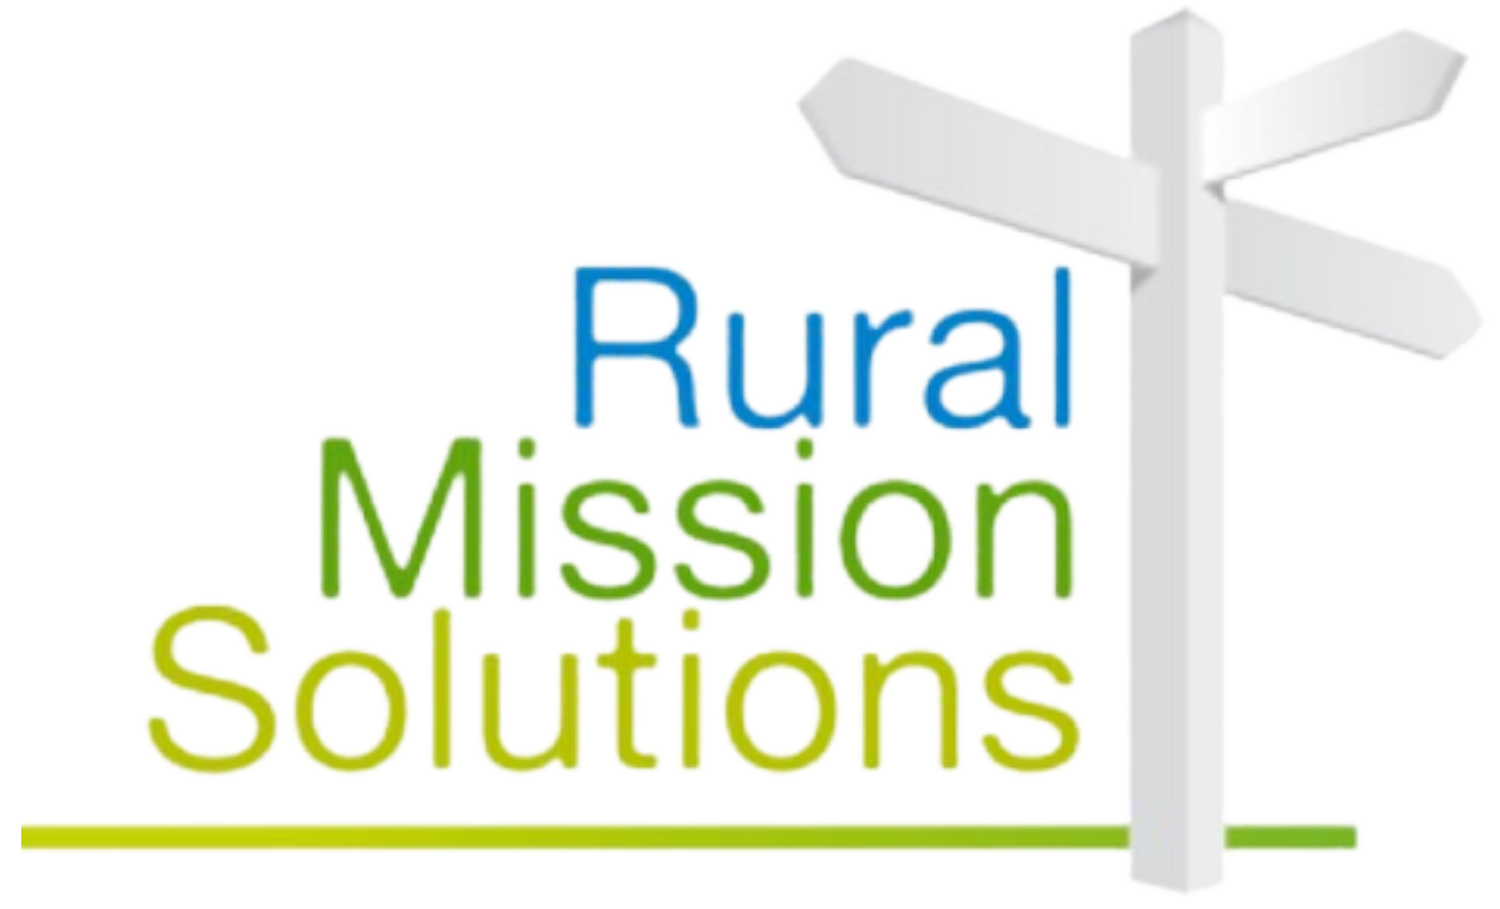 Rural Missions